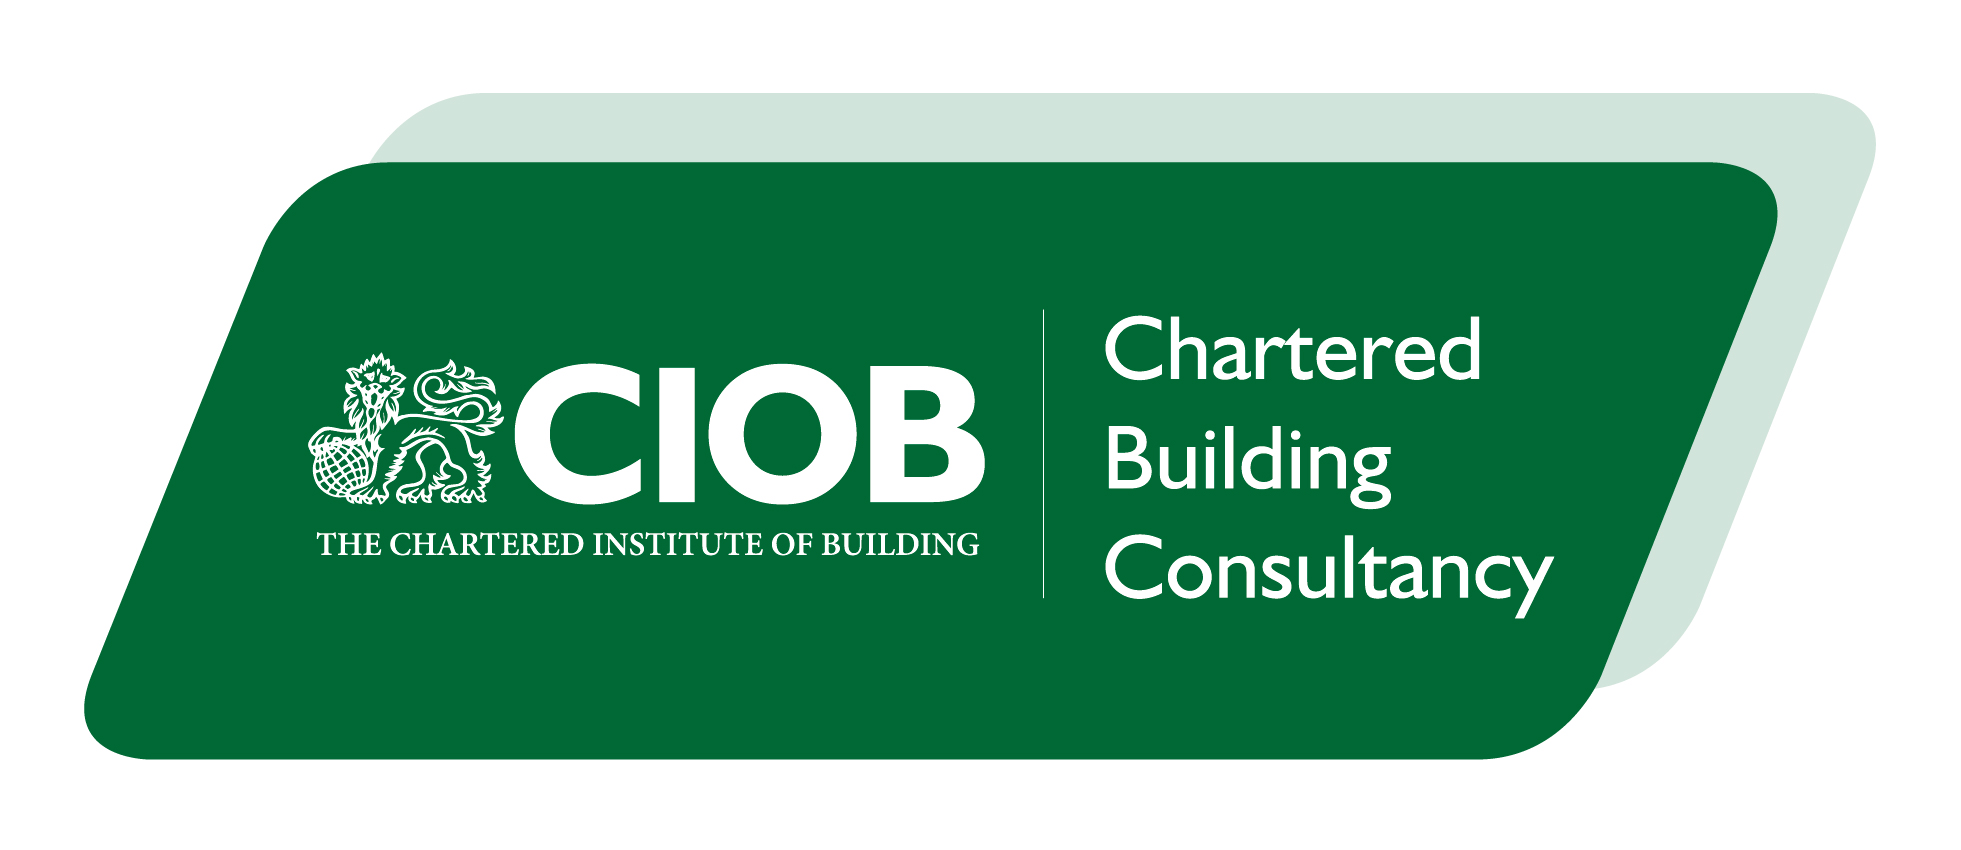 New CIOB - Chartered Building Consultancy Logo